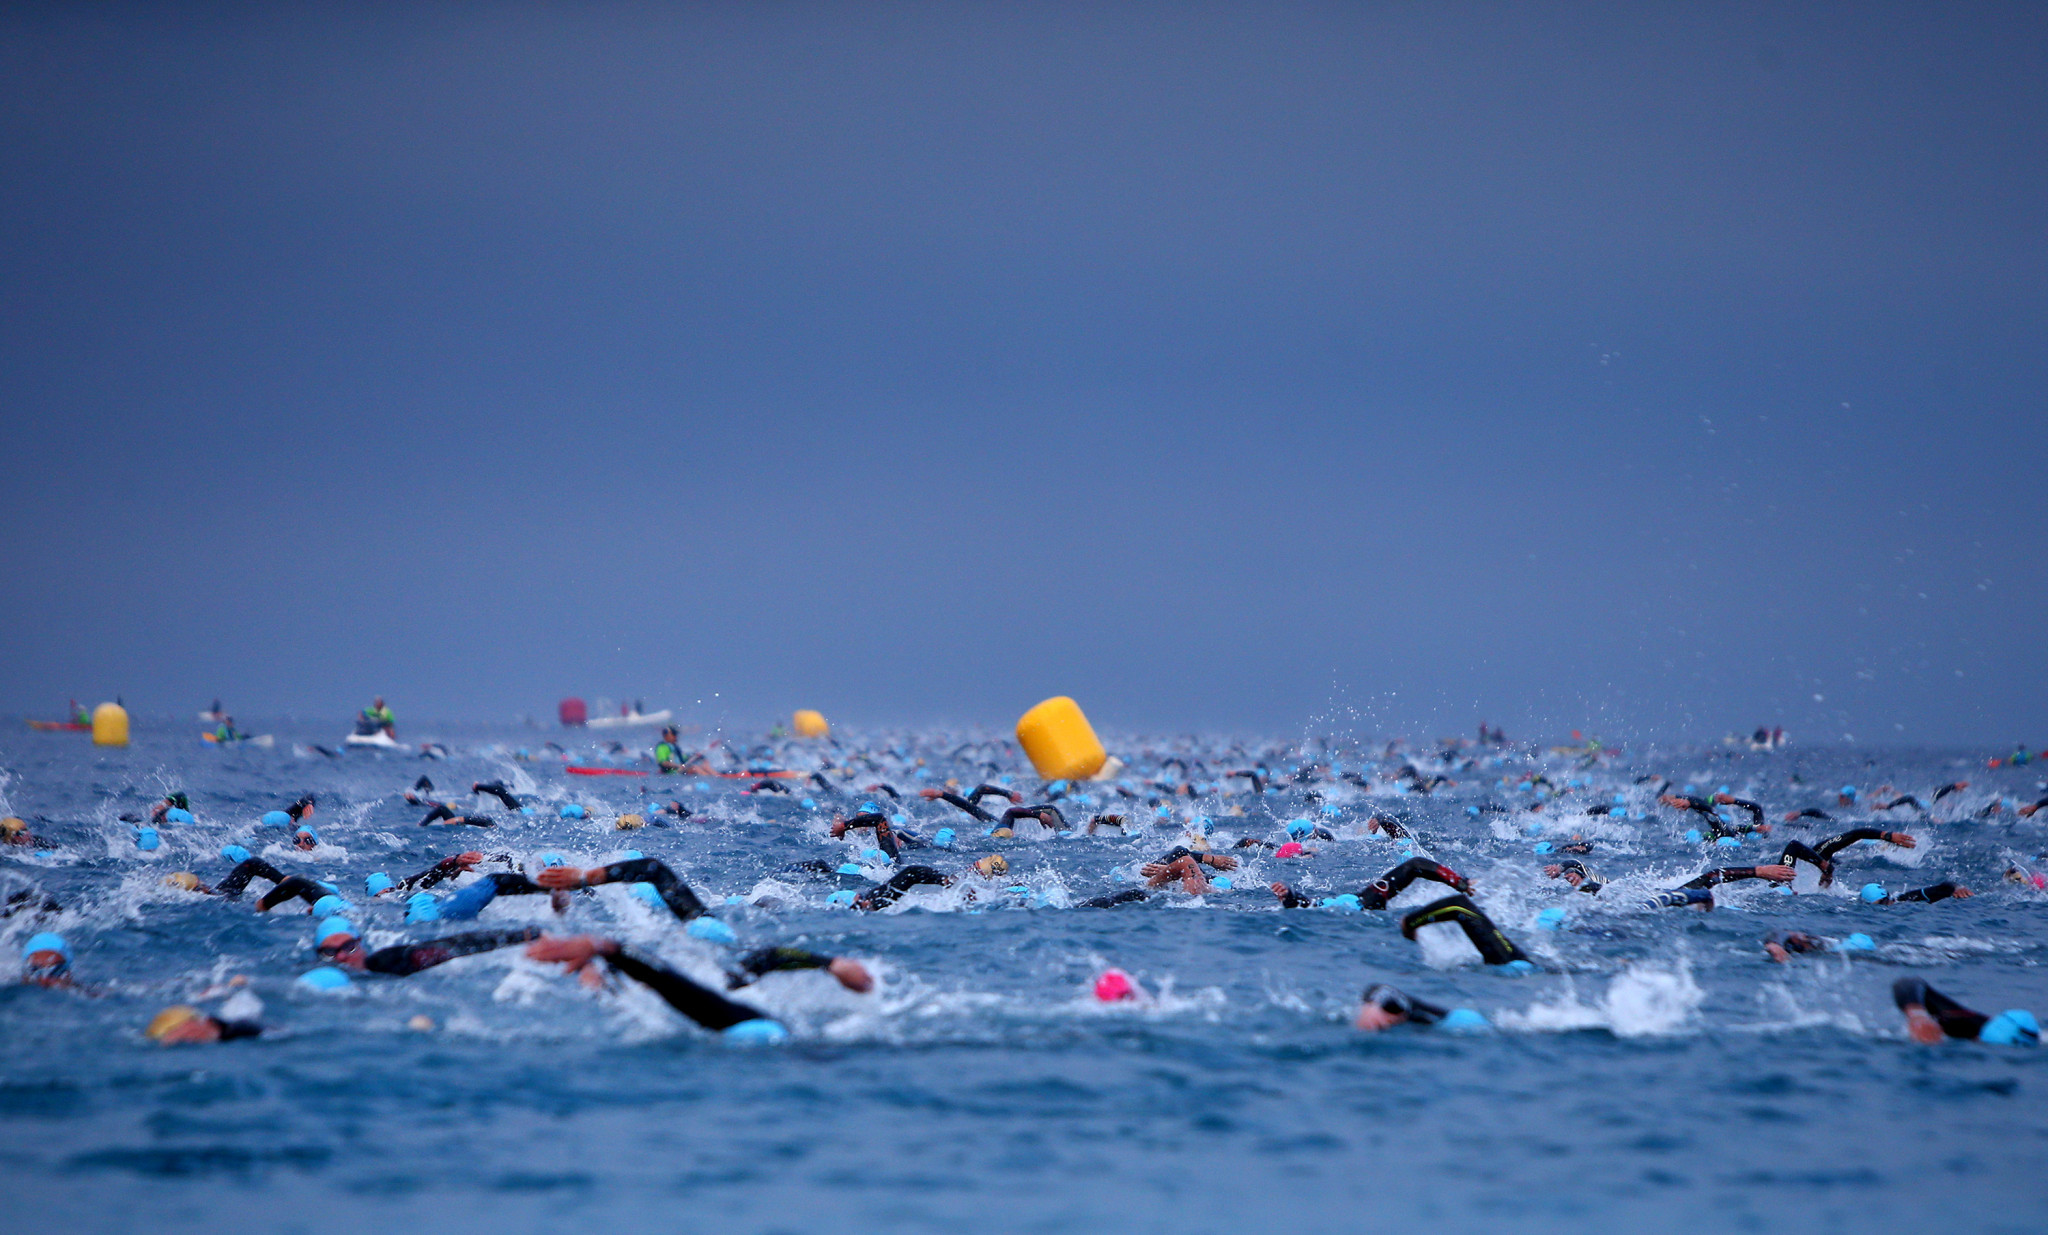 World Triathlon extends suspension of activities to end of June